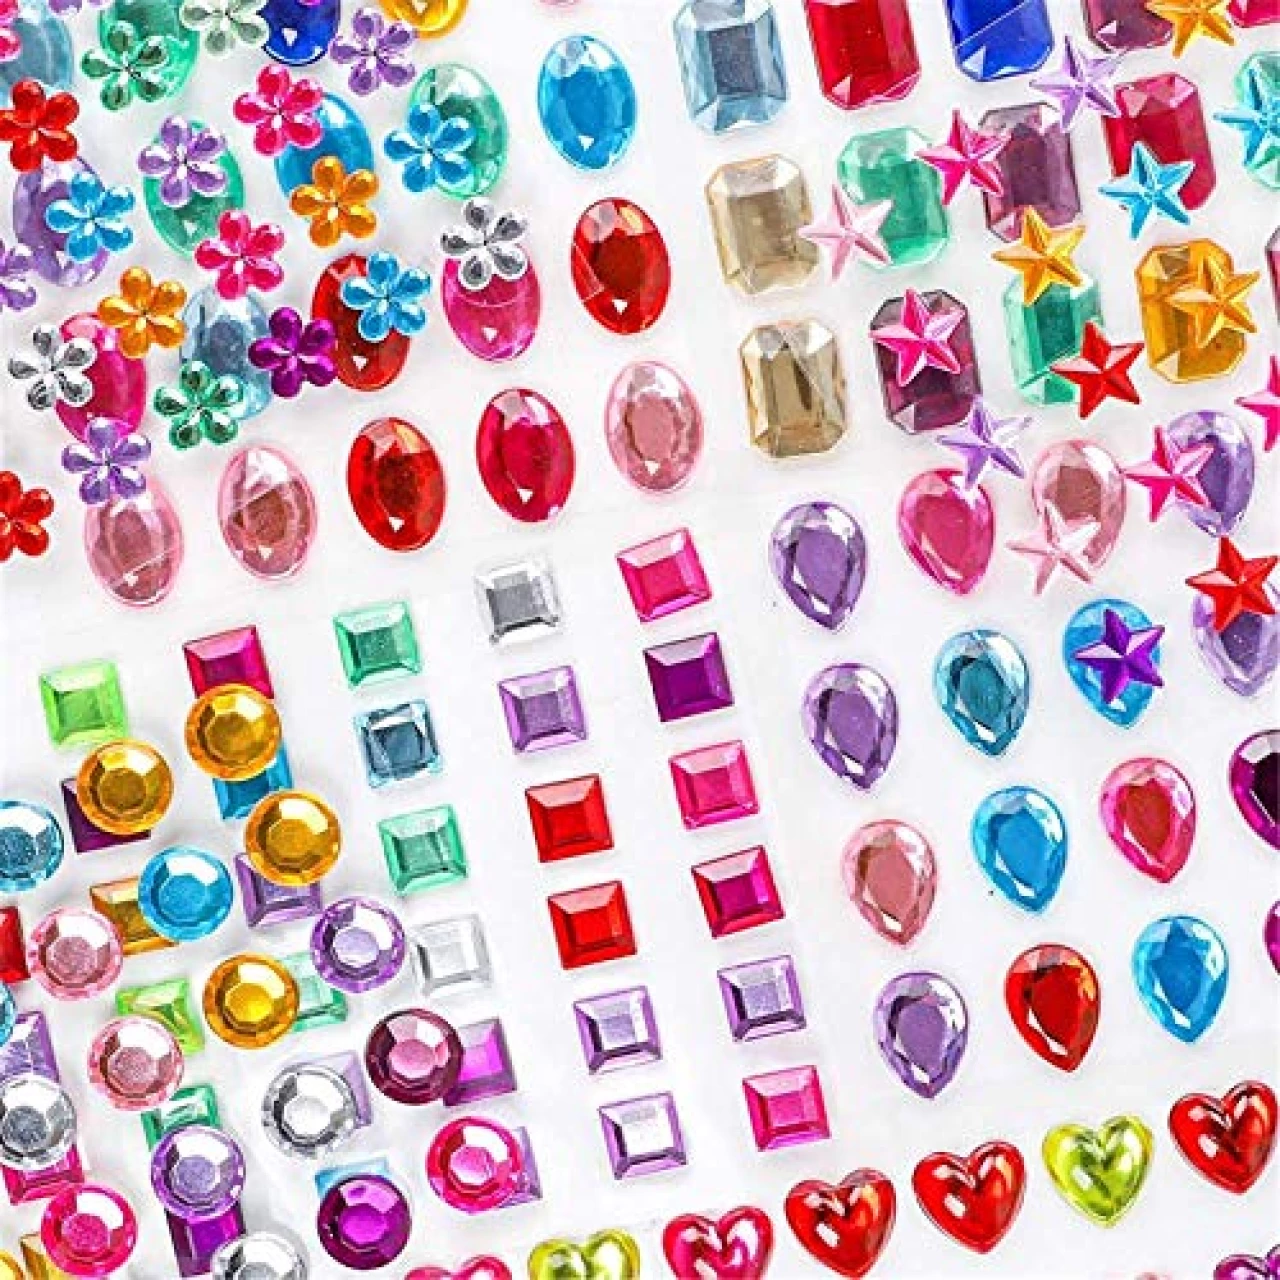 Holicolor 390pcs Gem Stickers Jewels Stickers Rhinestones Crystal for Halloween Pirate Party Table Decorations, Crafts Stickers Self Adhesive Craft Jewels, Muticolor, Assorted Size